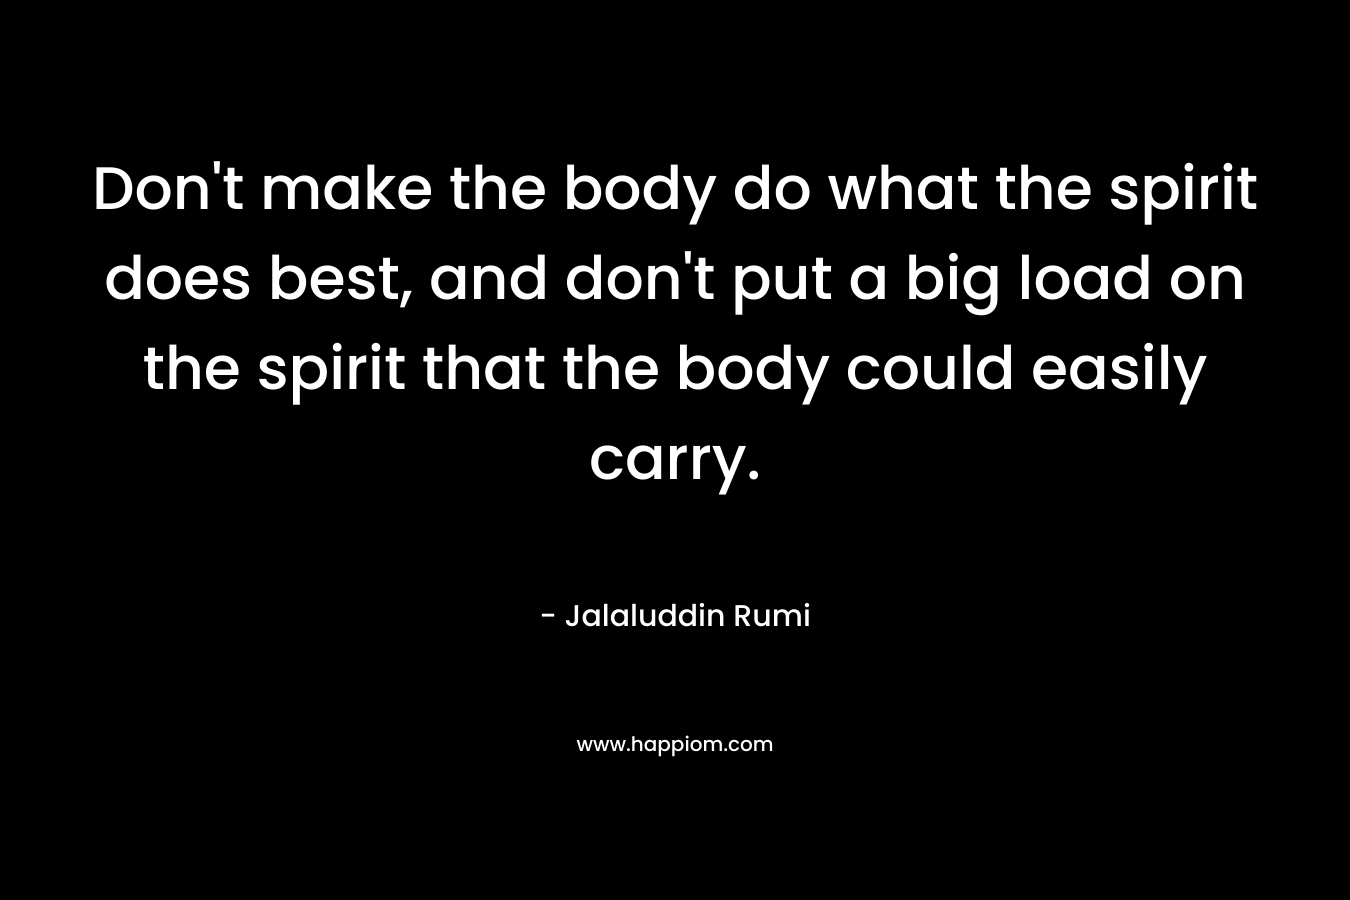 Don't make the body do what the spirit does best, and don't put a big load on the spirit that the body could easily carry.